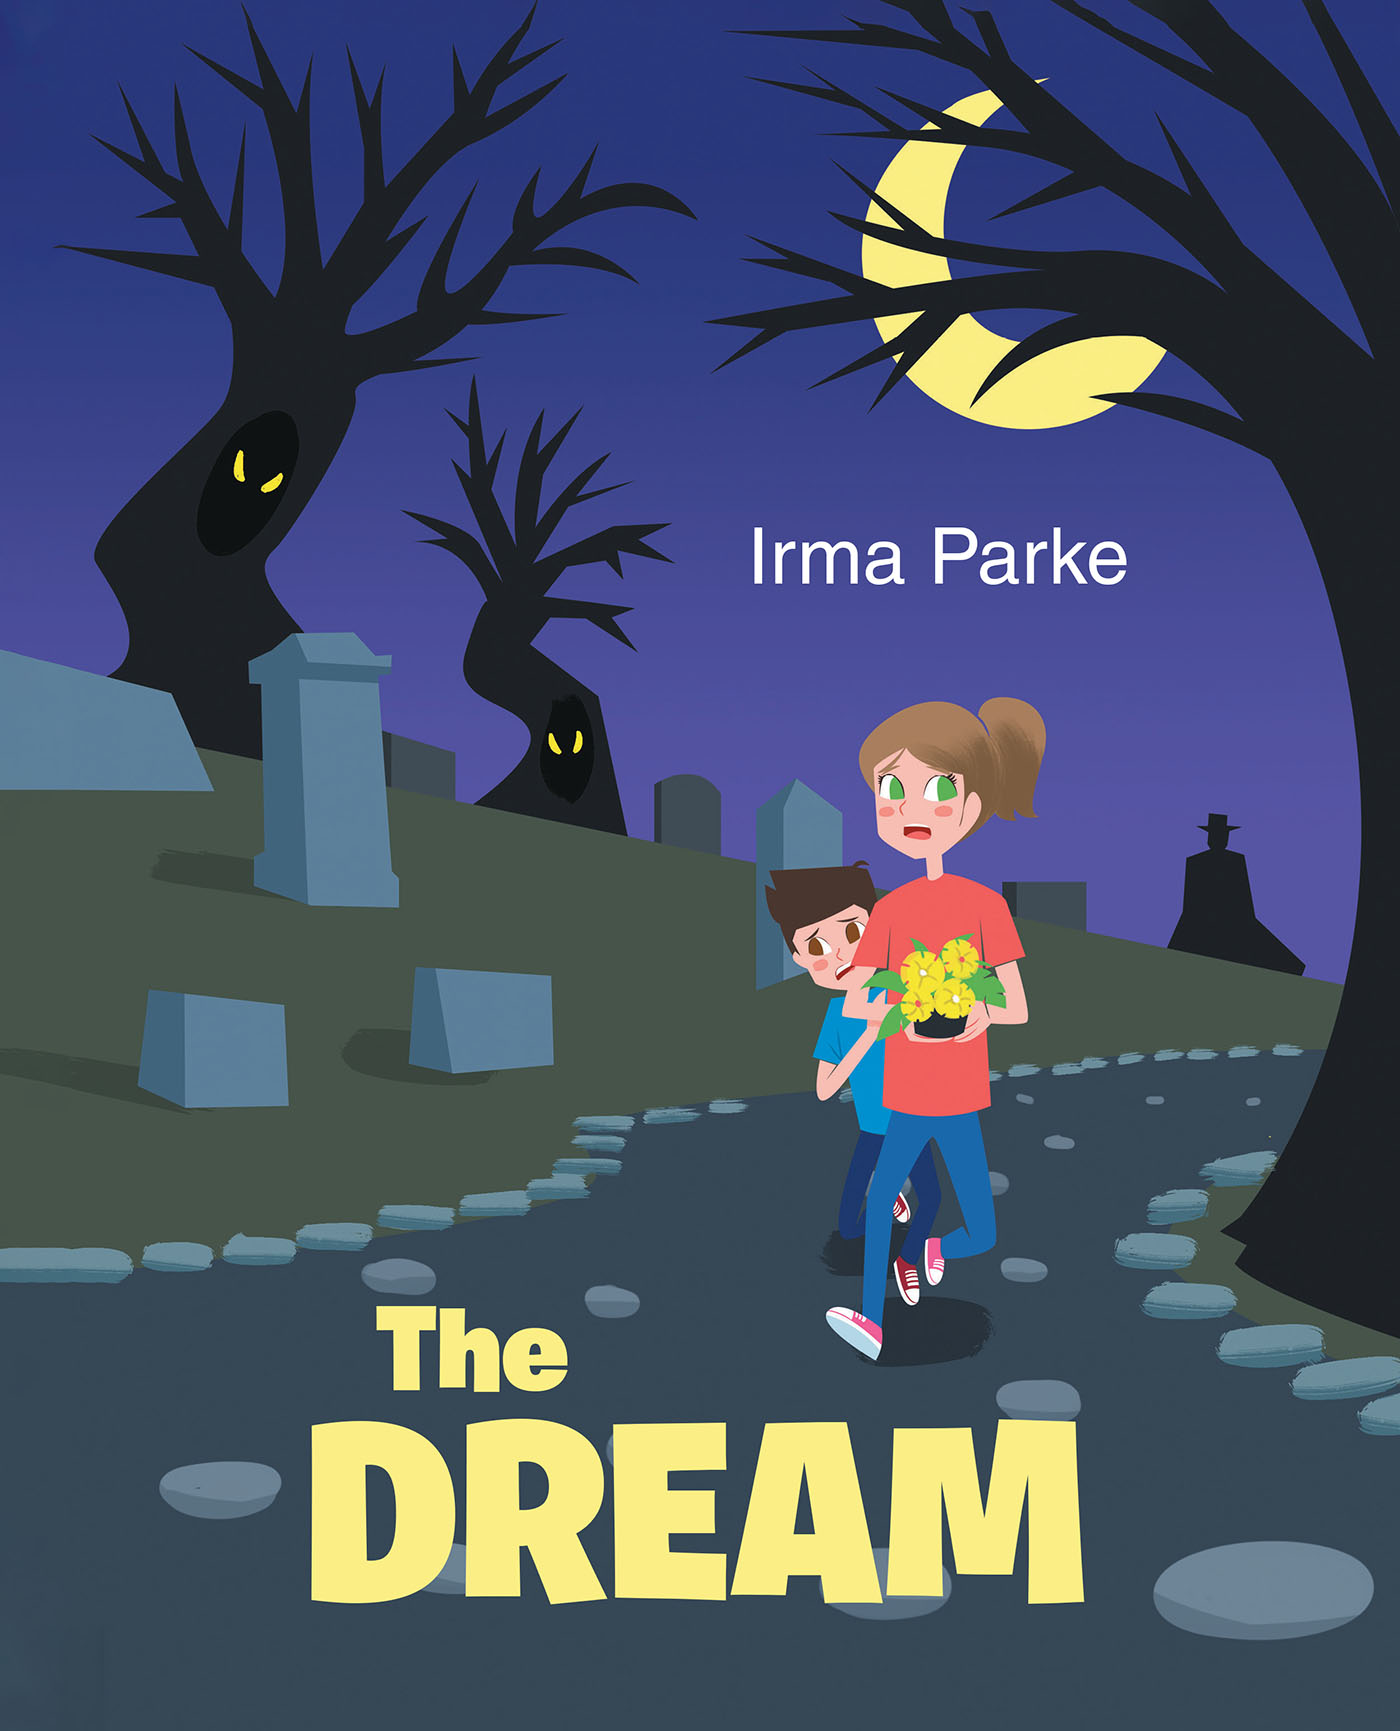 Irma Parke’s Newly Released "The Dream" is a Creative Narrative That Finds a Frustrated Older Sister Having a Surprising Realization Following a Scary Dream